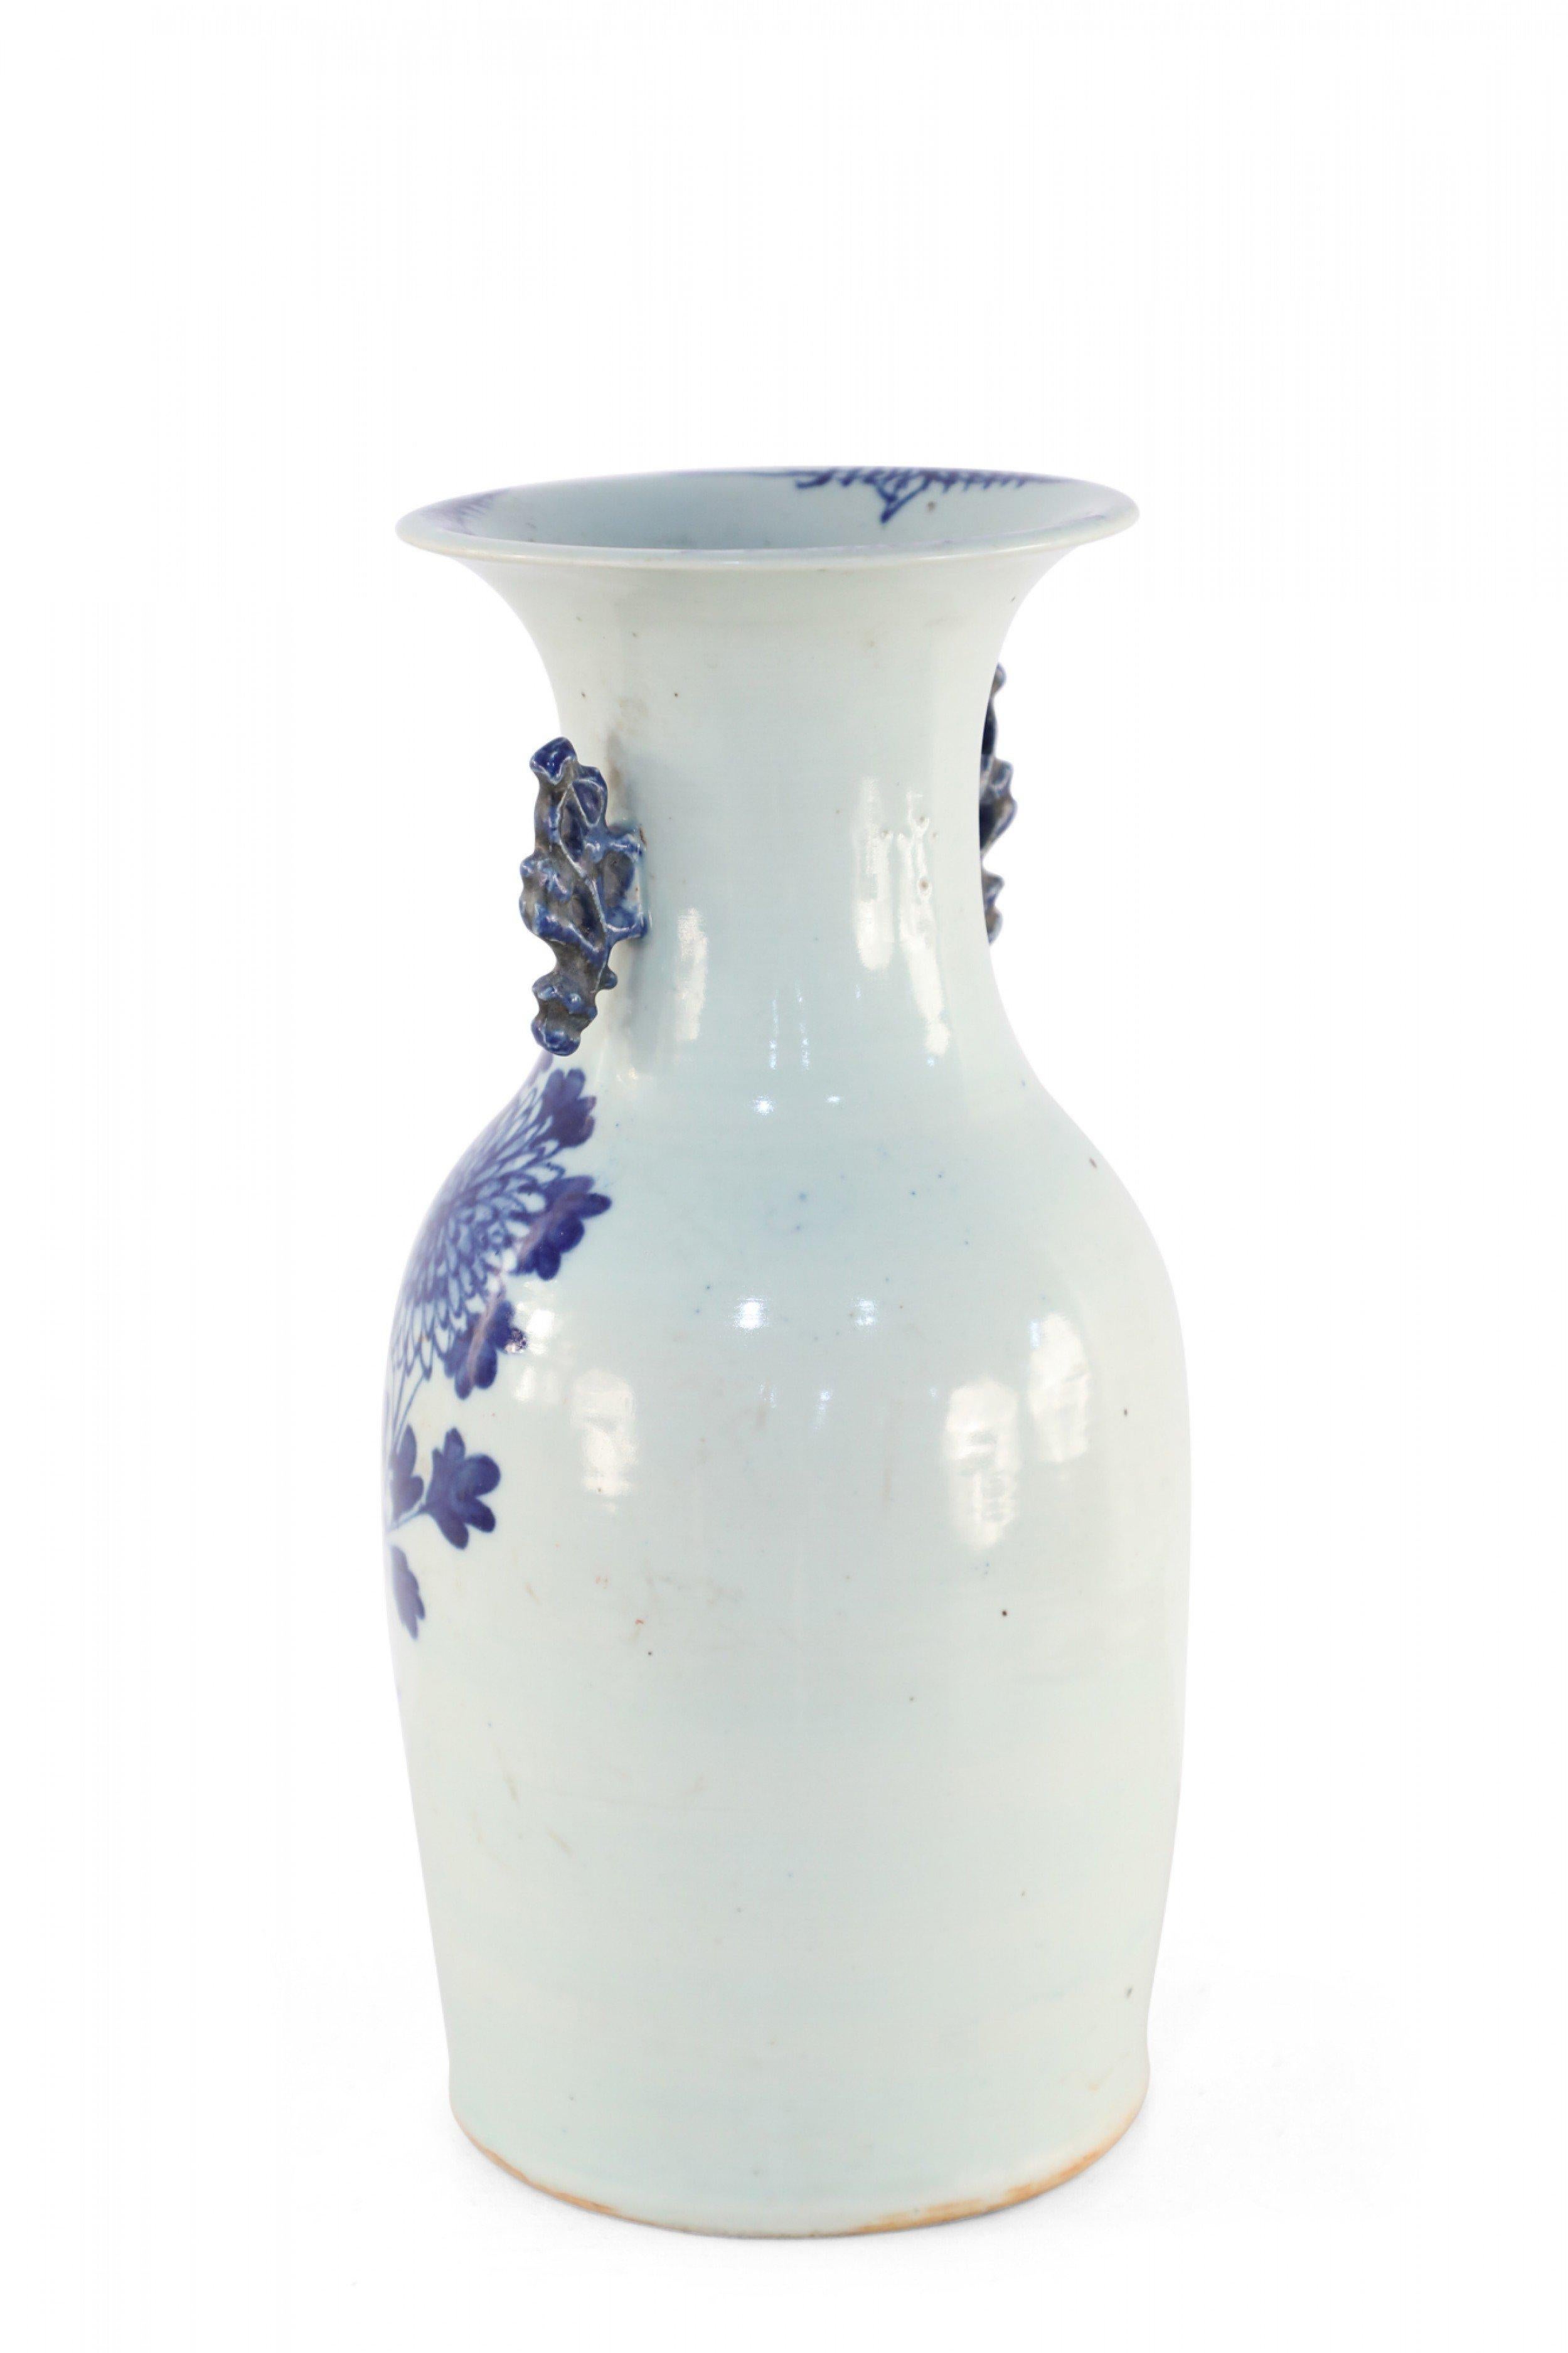 19th Century Chinese White and Blue Chrysanthemum and Bird Porcelain Urn For Sale